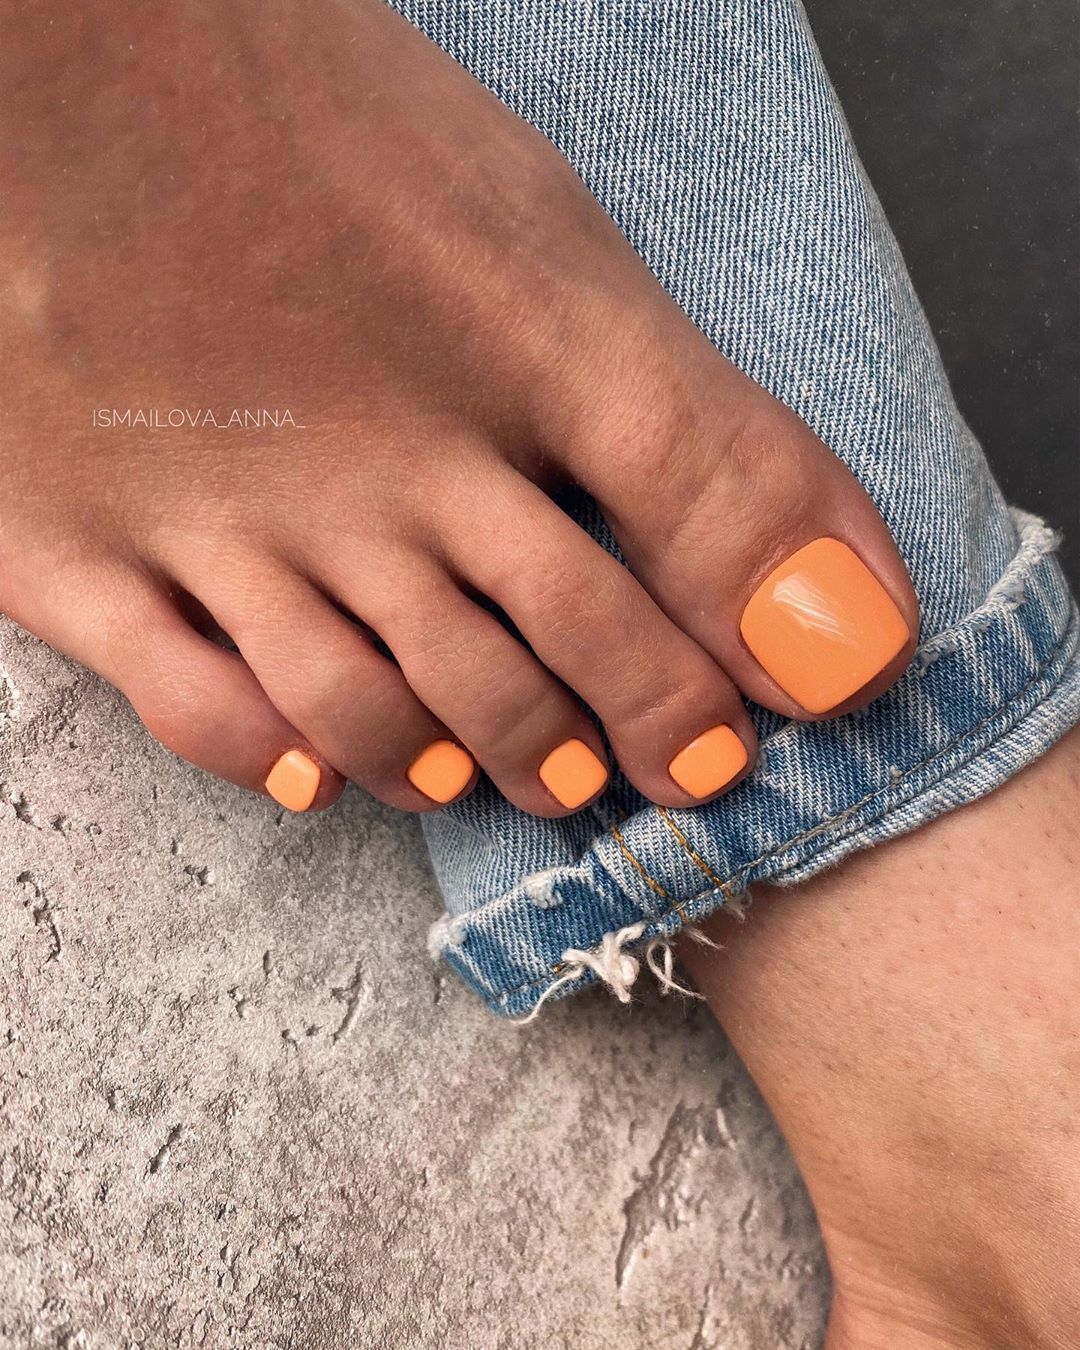 Fall Toe Nail Colors 20 Ideas: Embrace the Autumn Vibes with Stylish Nail Art